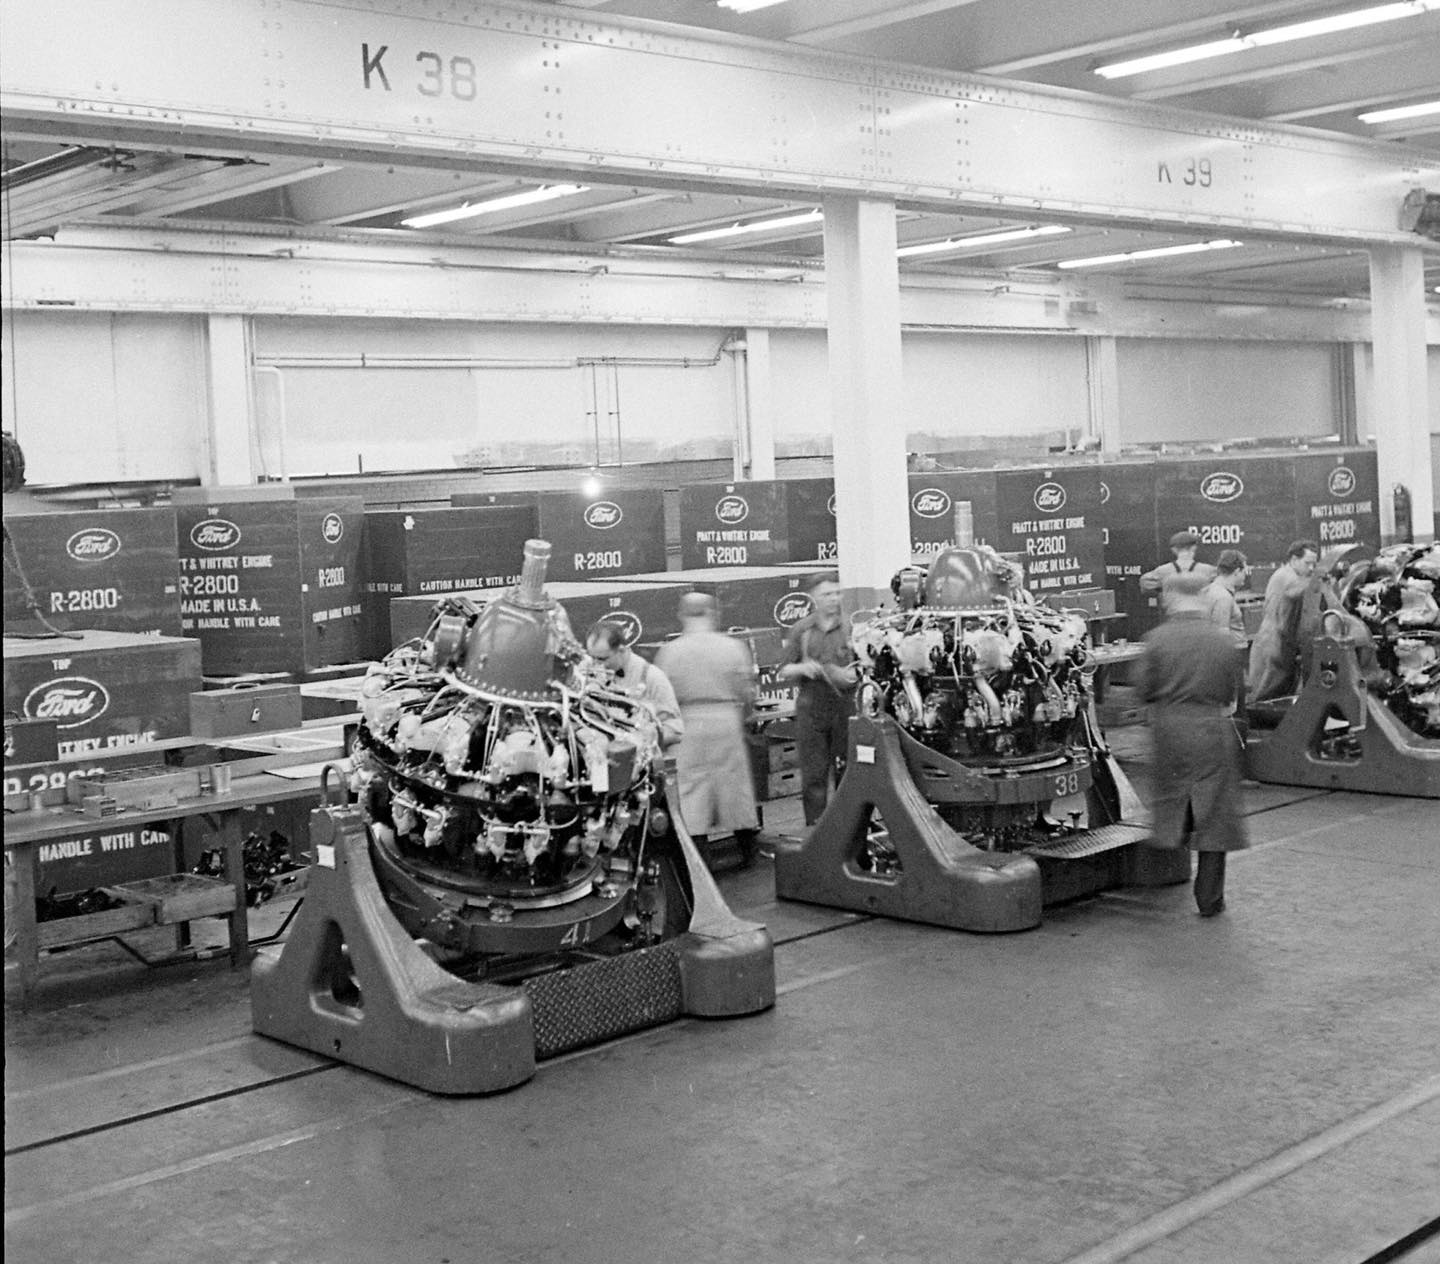 Pratt & Whitney R-2800 Double Wasp engines are prepared for shipment at the Ford Aircraft Engi...jpg